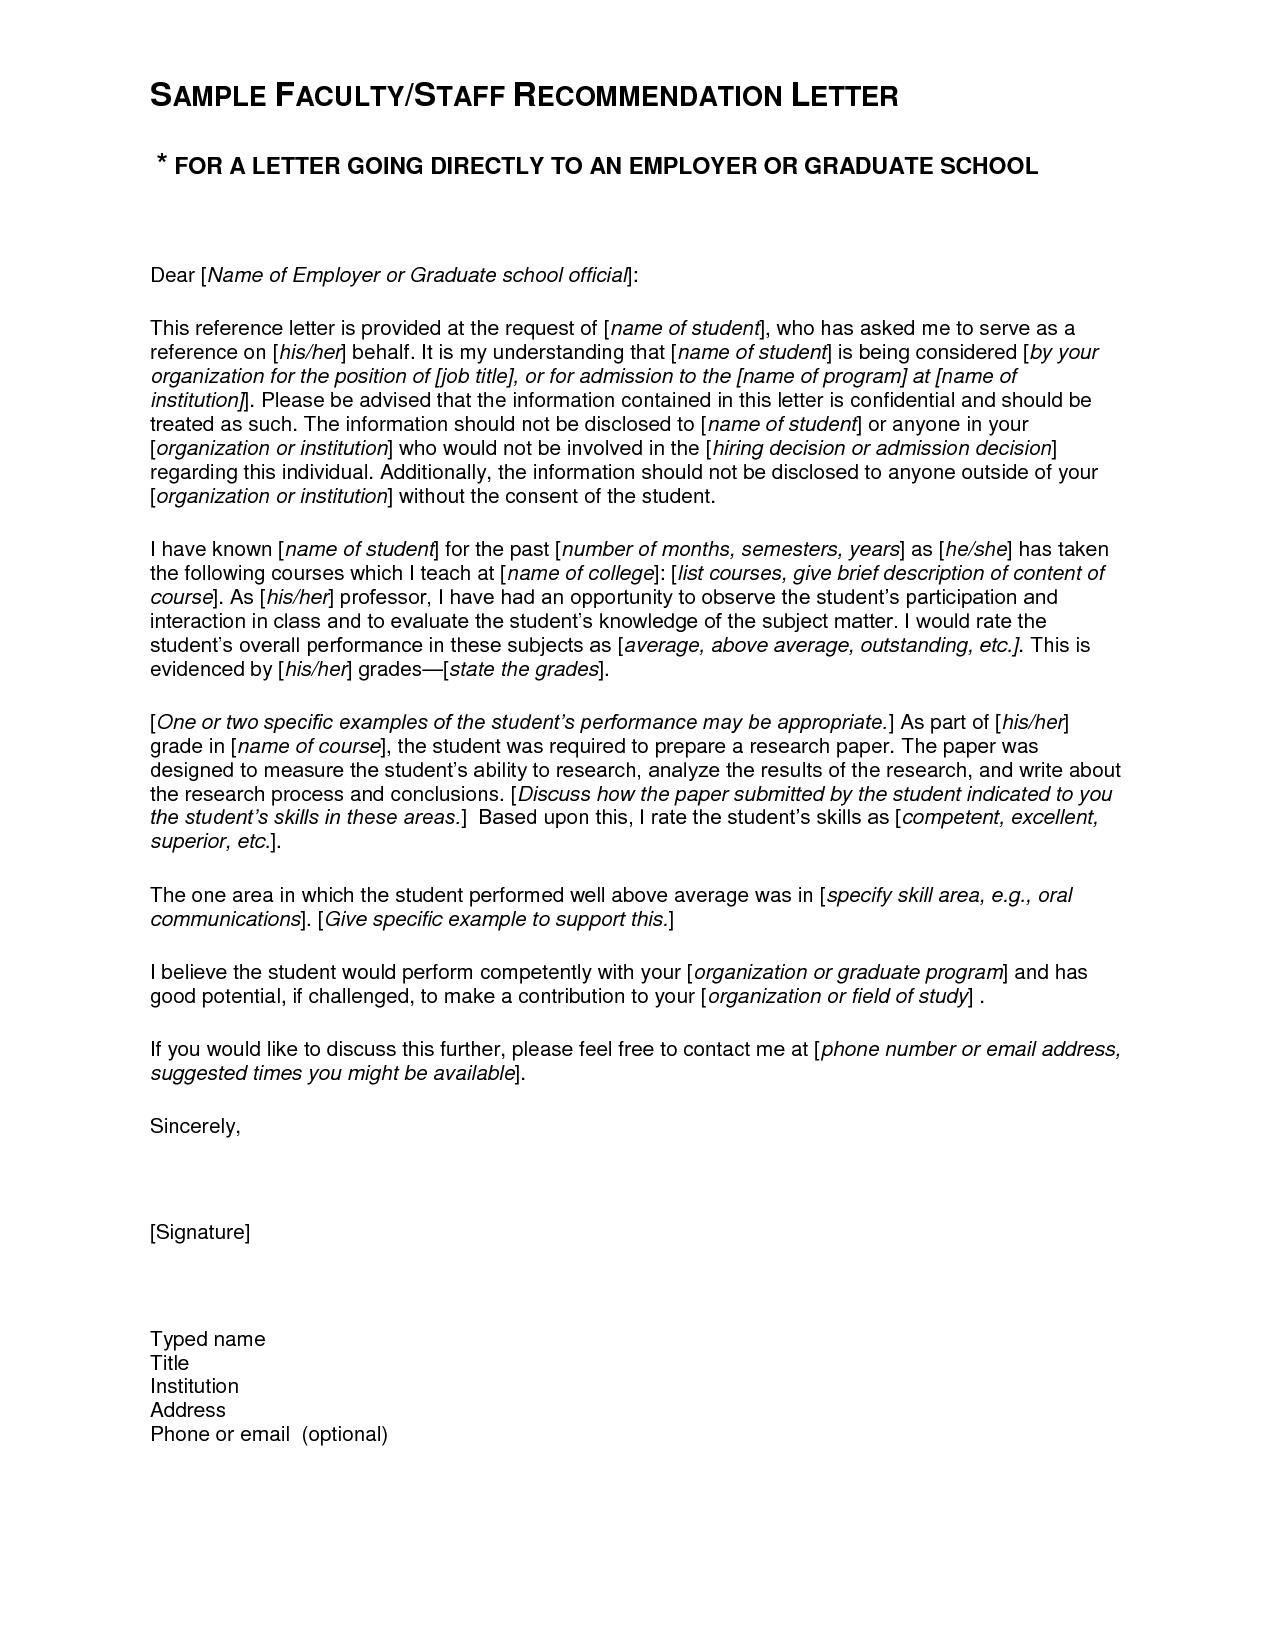 Best Recommendation Letter For Phd Student Debandje within dimensions 1275 X 1650